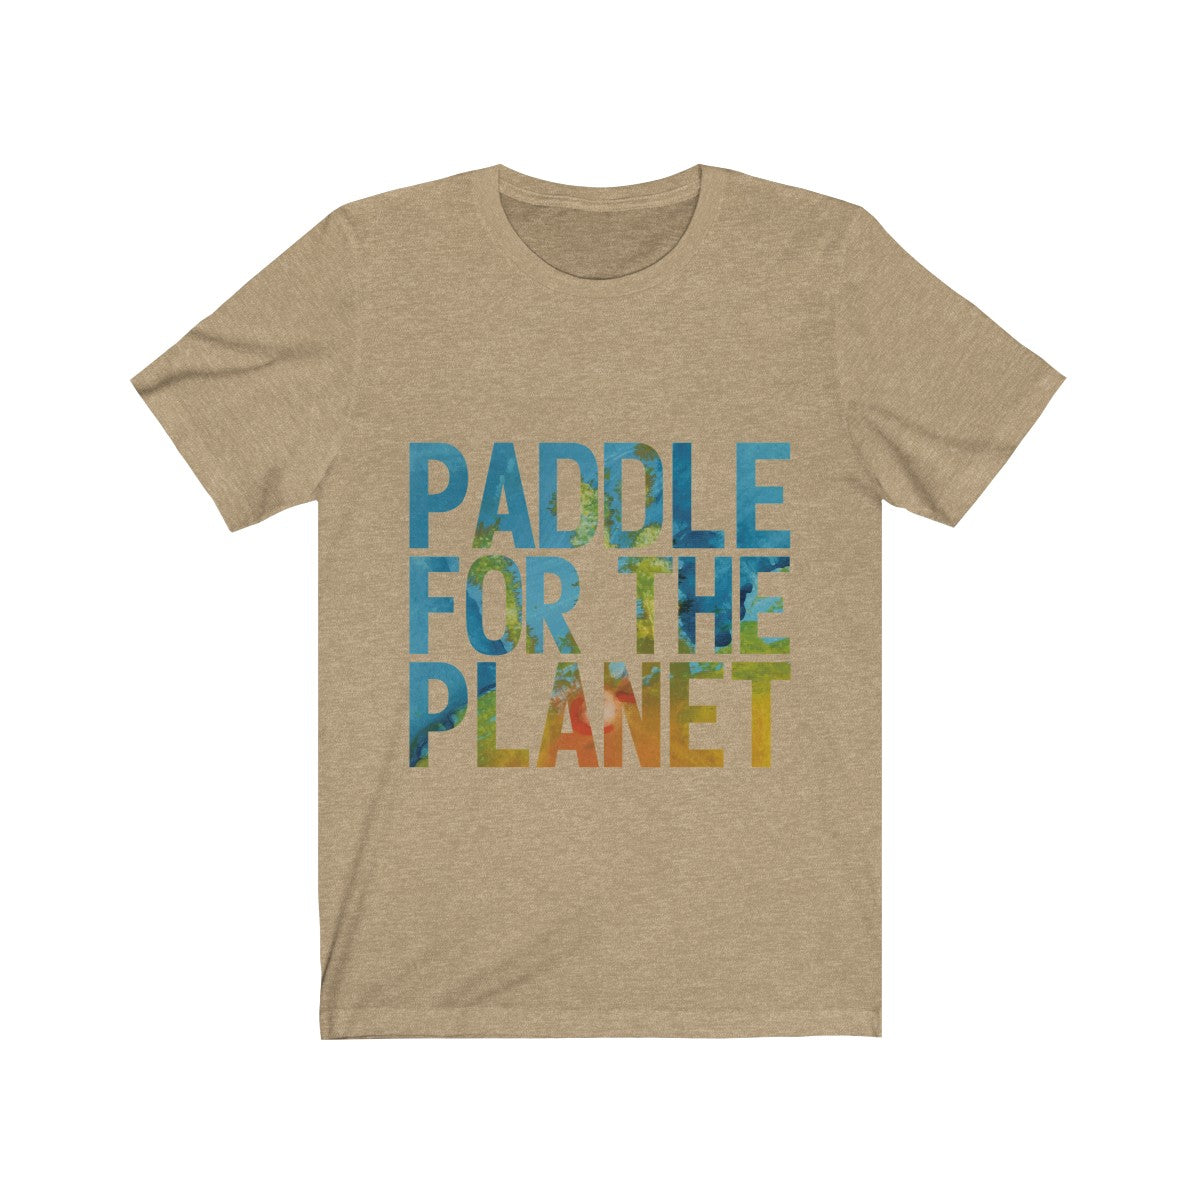 Paddle For The Planet Unisex Jersey Short Sleeve Tee